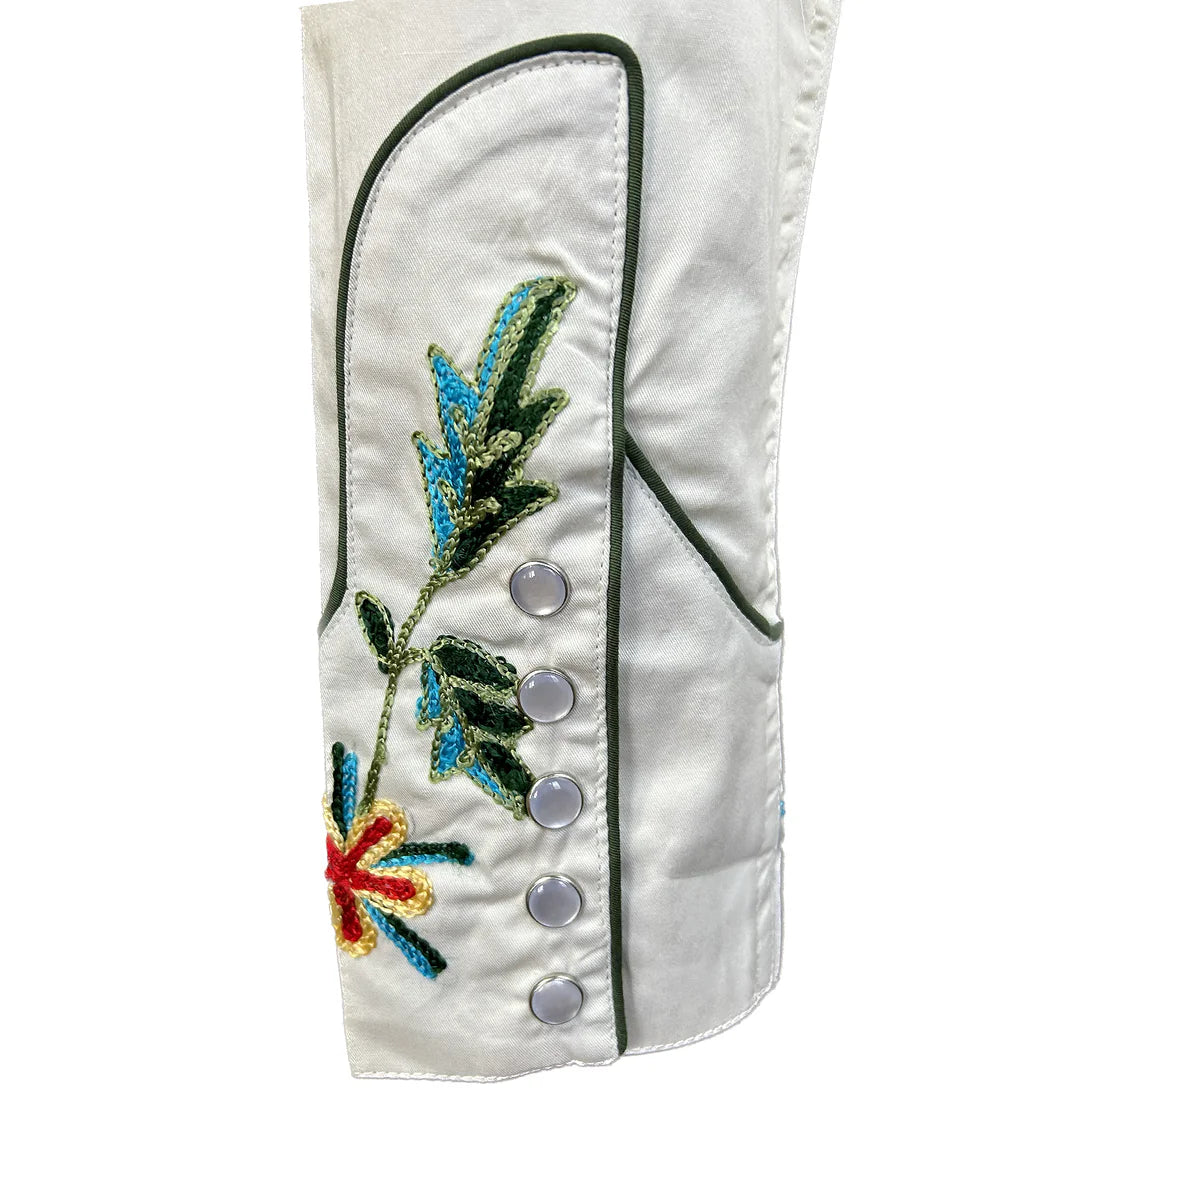 Vintage Inspired Western Shirt Ladies Rockmount Floral Embroidery Ivory Cuff